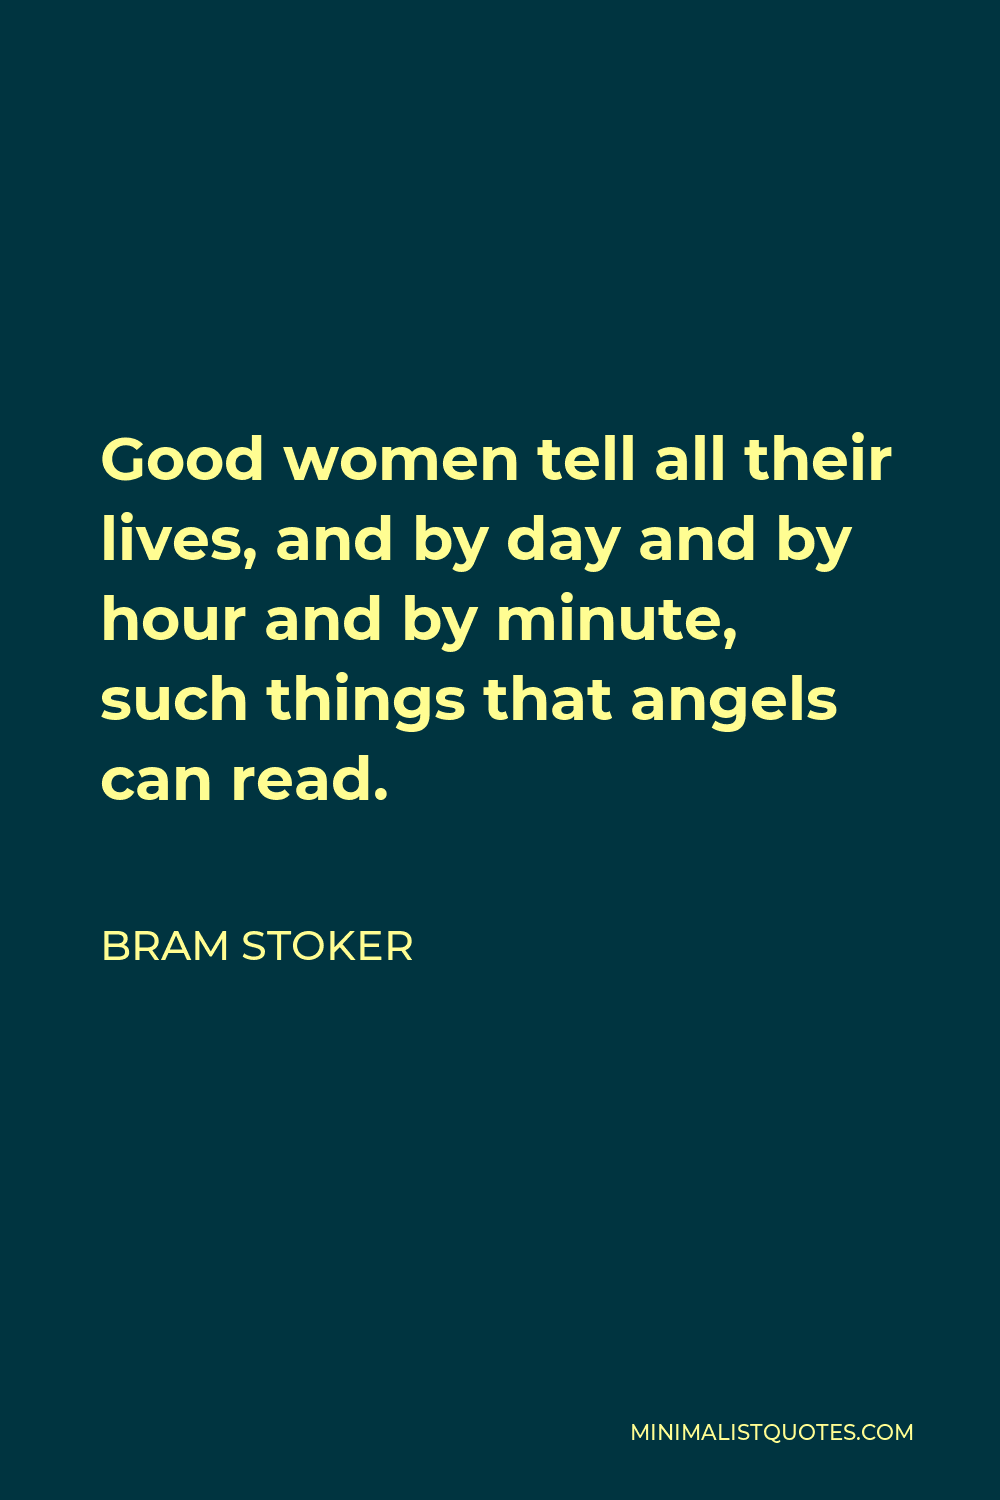 Bram Stoker Quote - Good women tell all their lives, and by day and by hour and by minute, such things that angels can read.